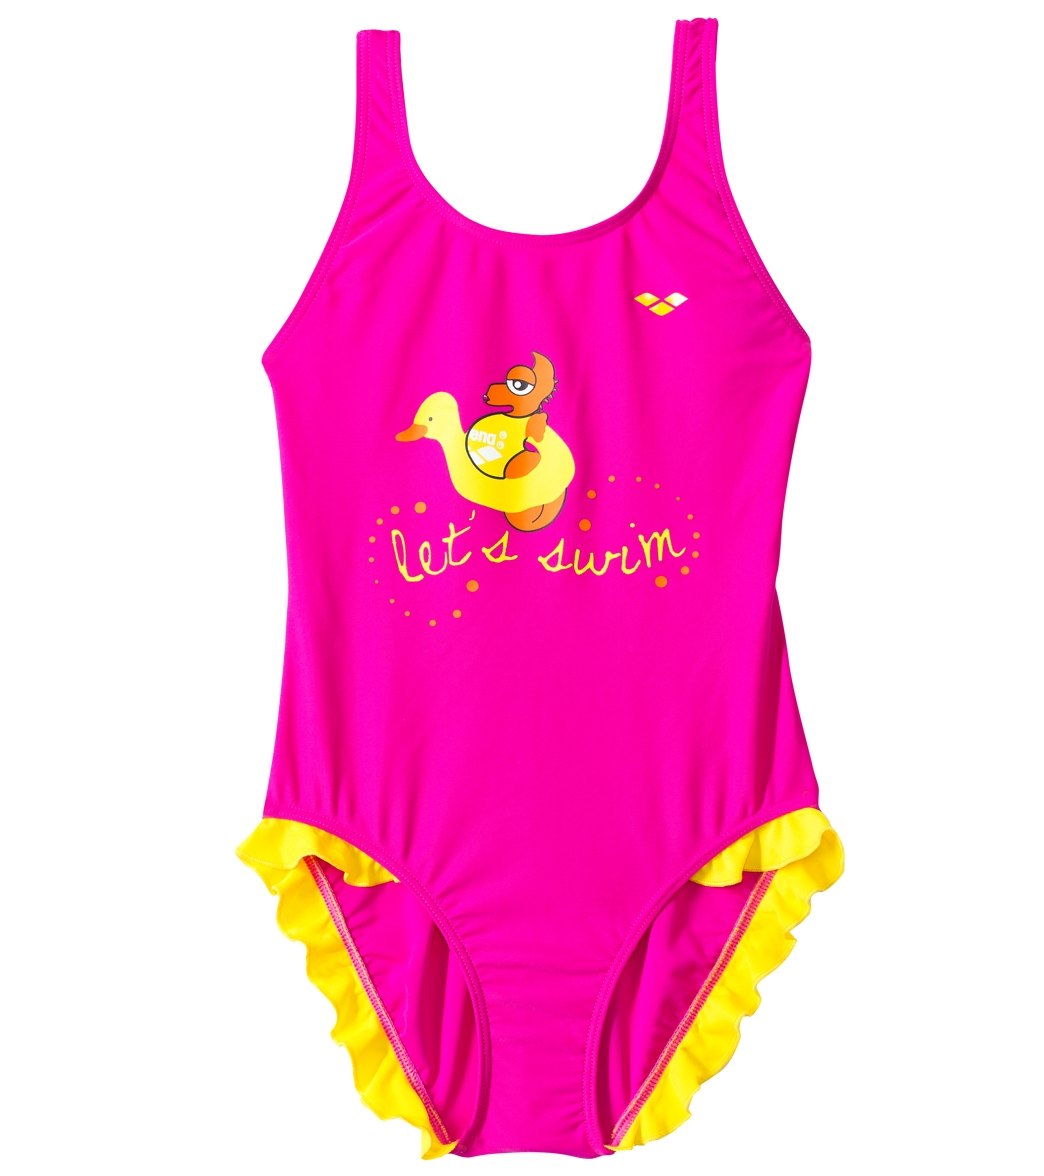 Arena Water Tribe Girls One Piece Swimsuit - Rose Violet 2T Elastane/Polyamide - Swimoutlet.com